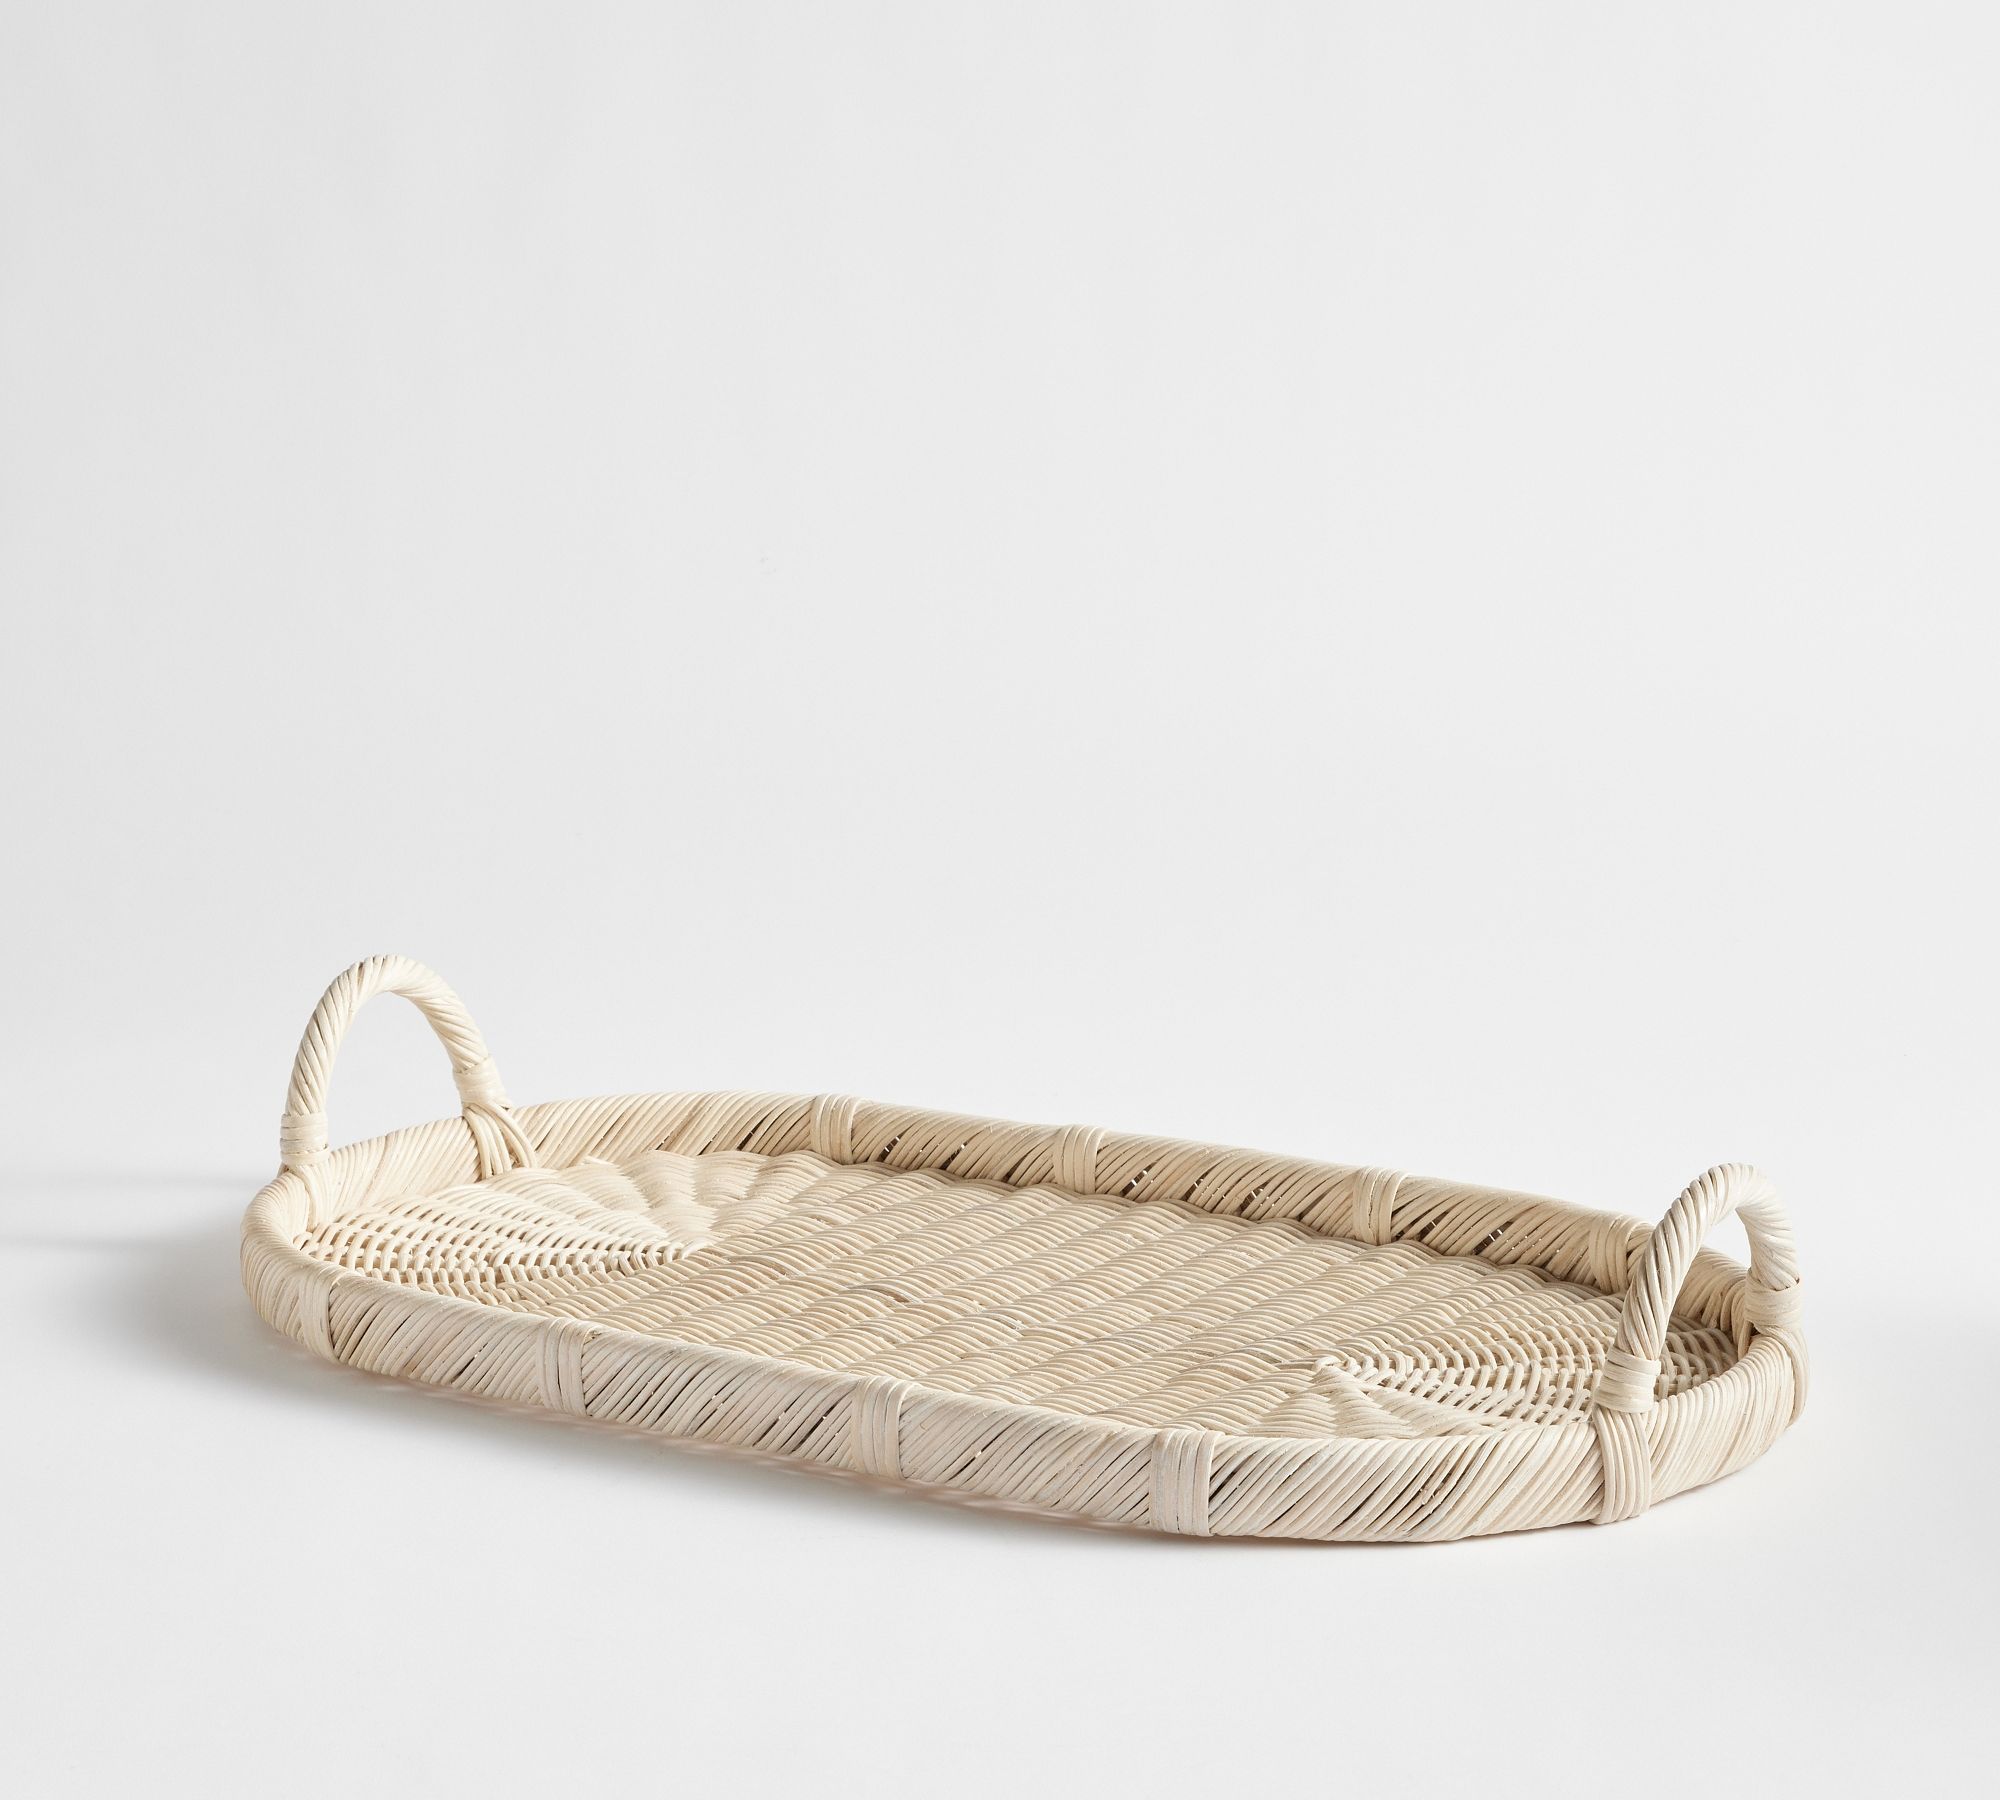 Handwoven Wicker Oval Serving Tray